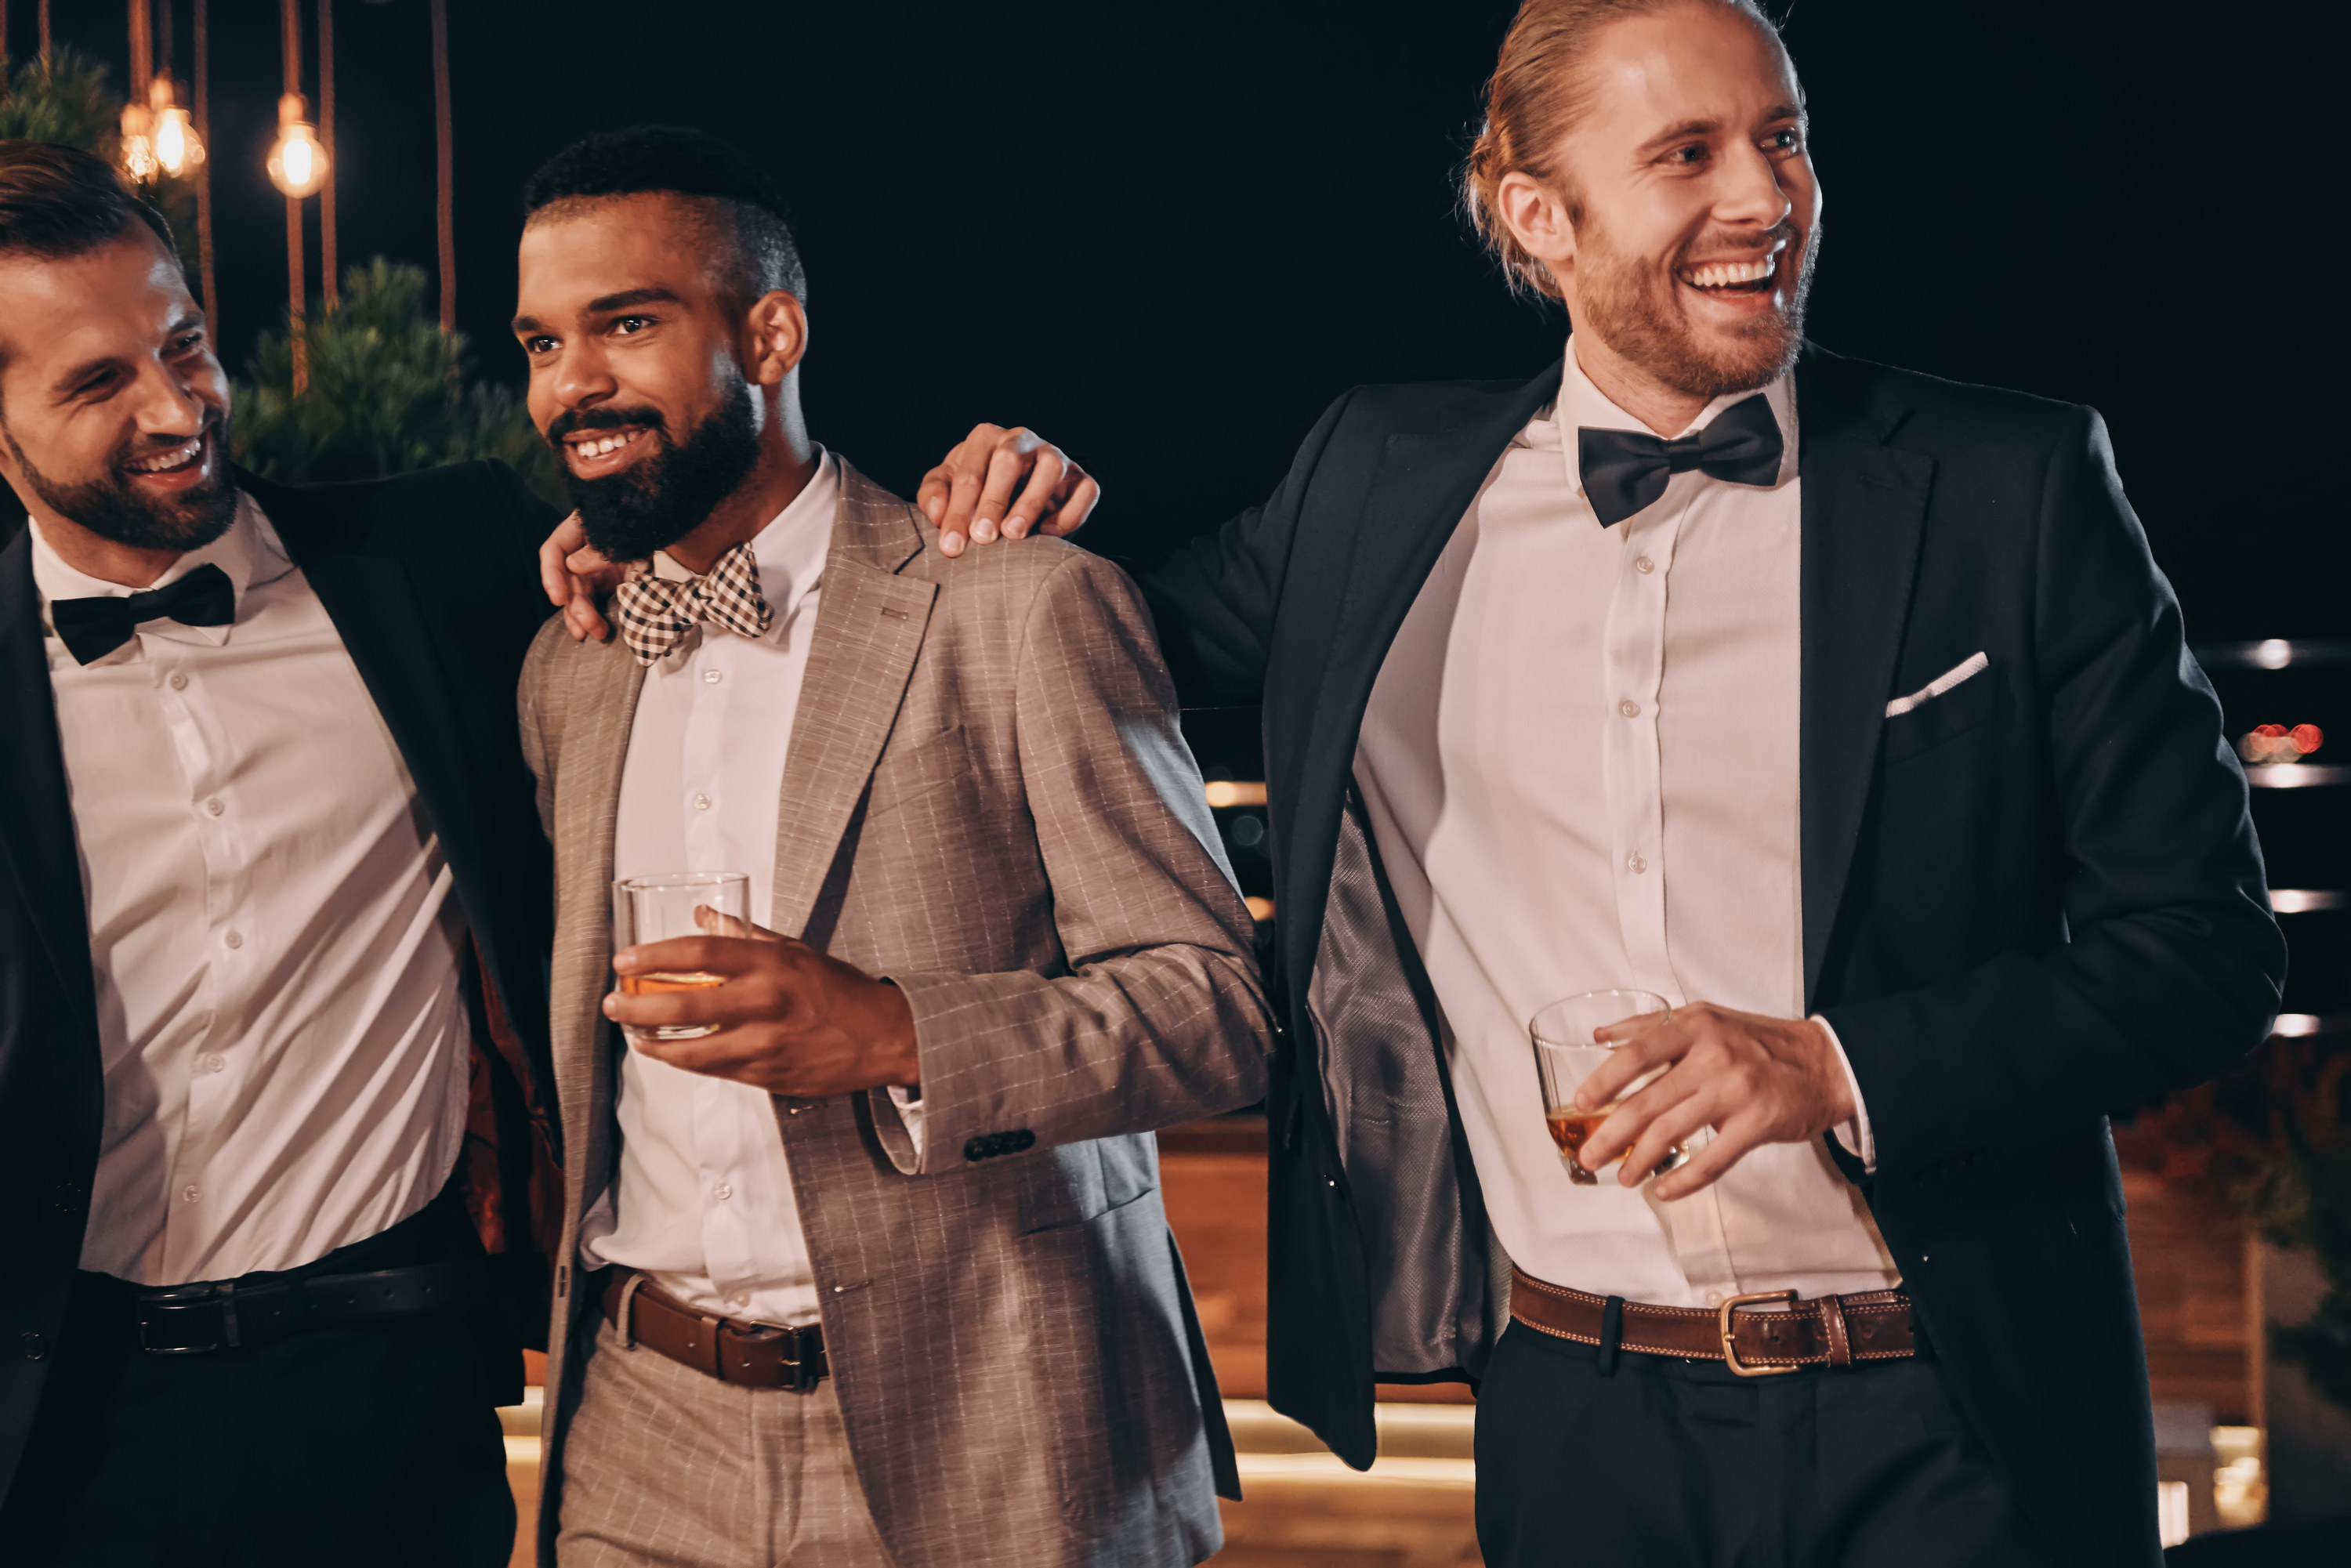 Three men hold drinks in hands, smiling at a wedding